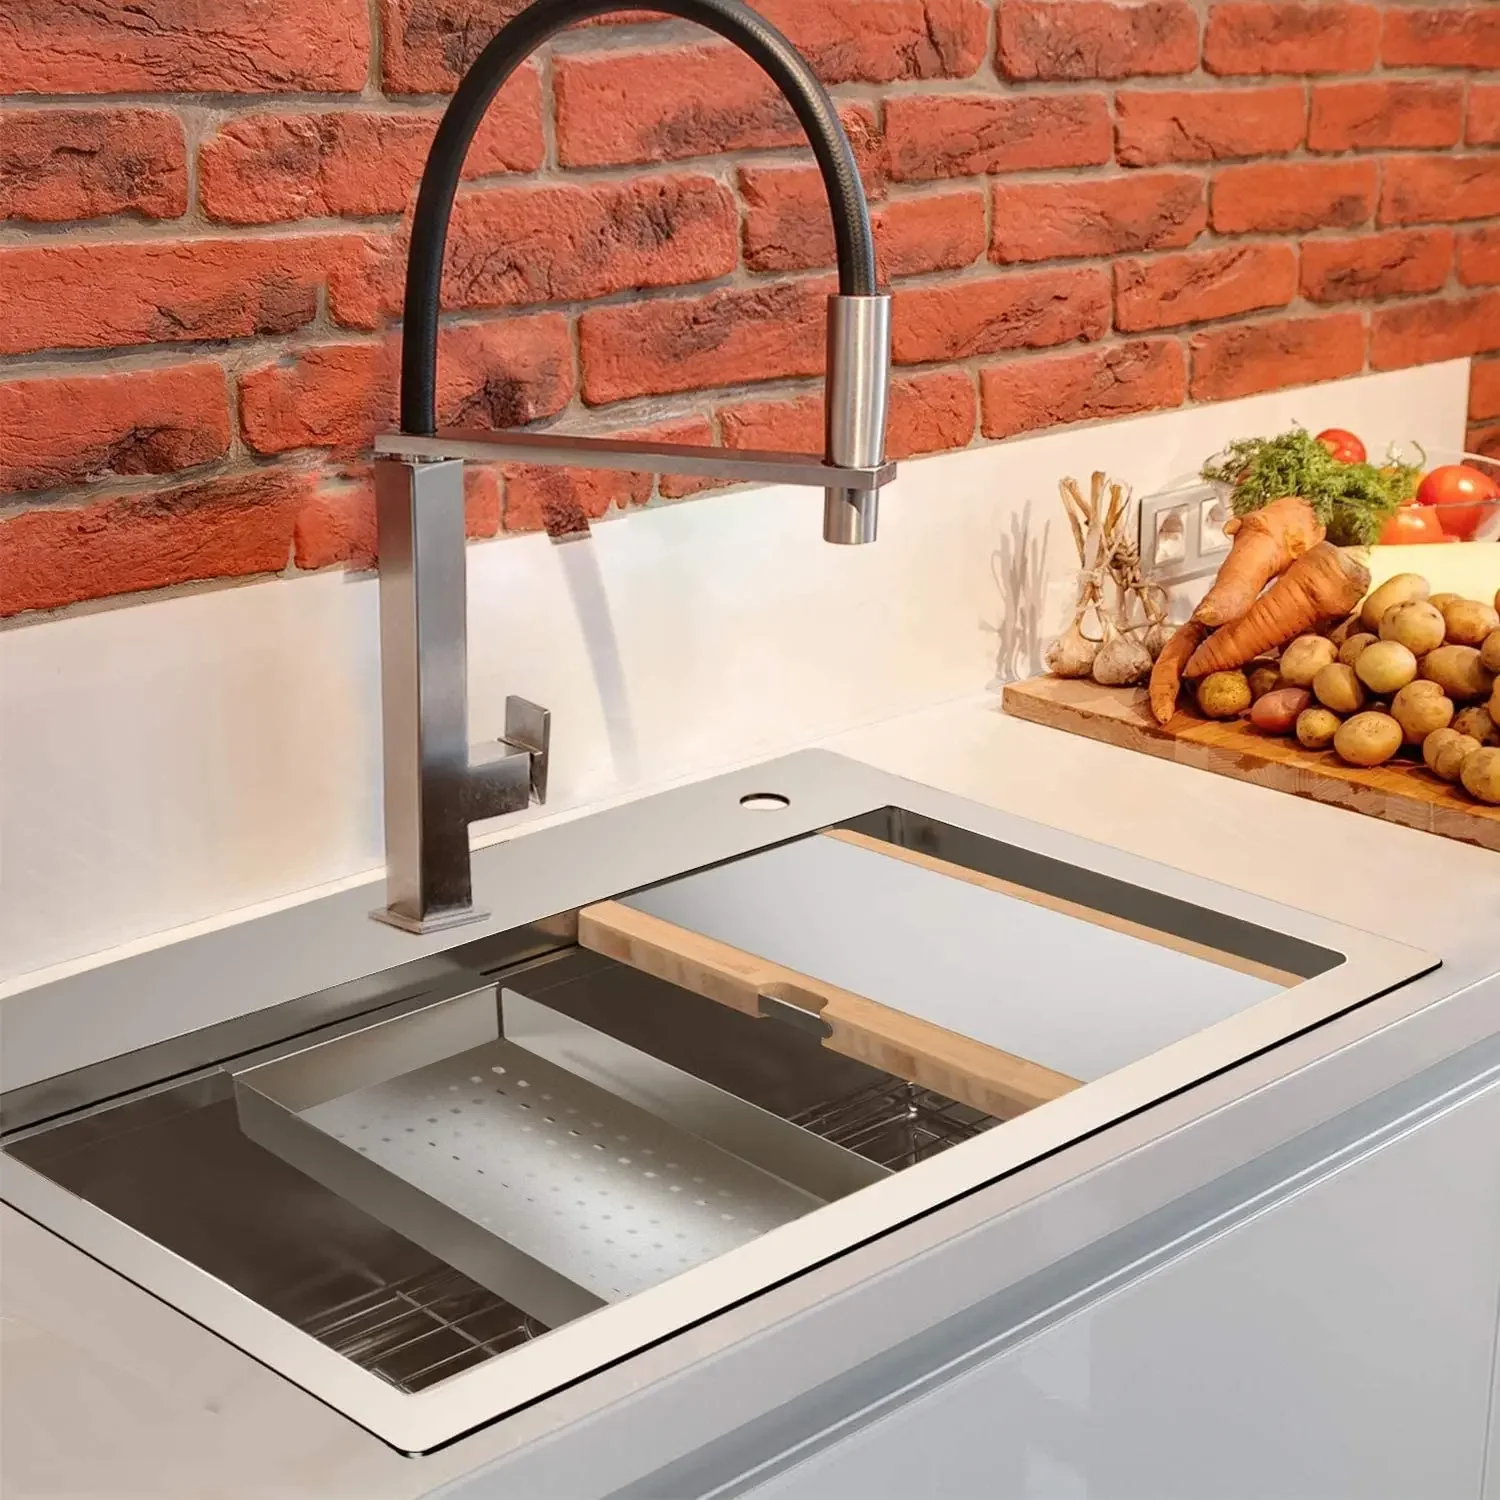 25-x-22-x-10-Stainless-Steel Sink